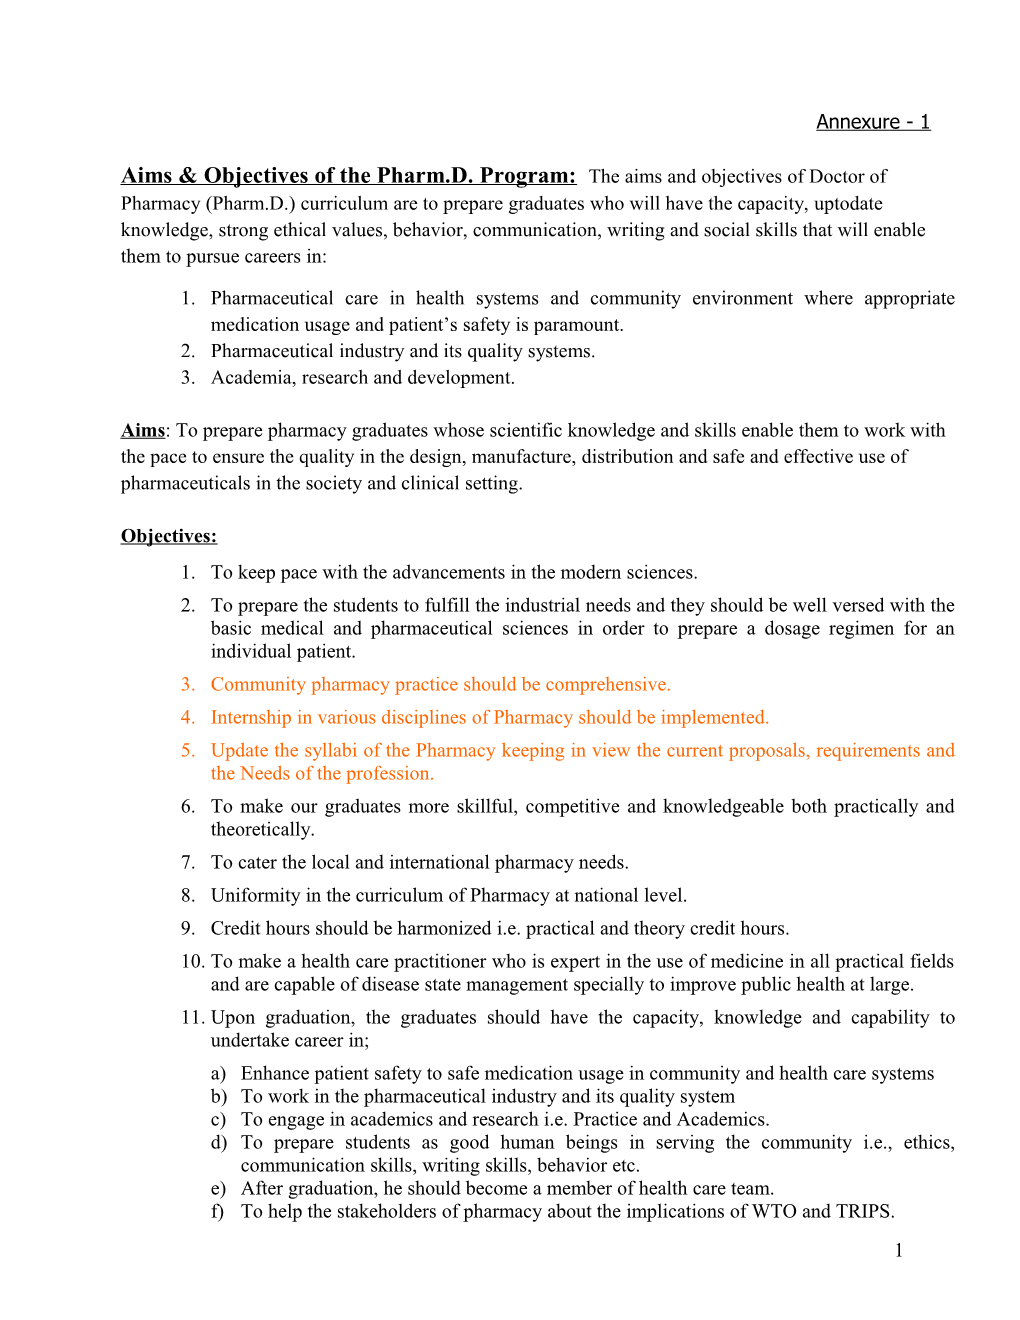 Aims & Objectives of the Pharm.D. Program: the Aims and Objectives of Doctor of Pharmacy